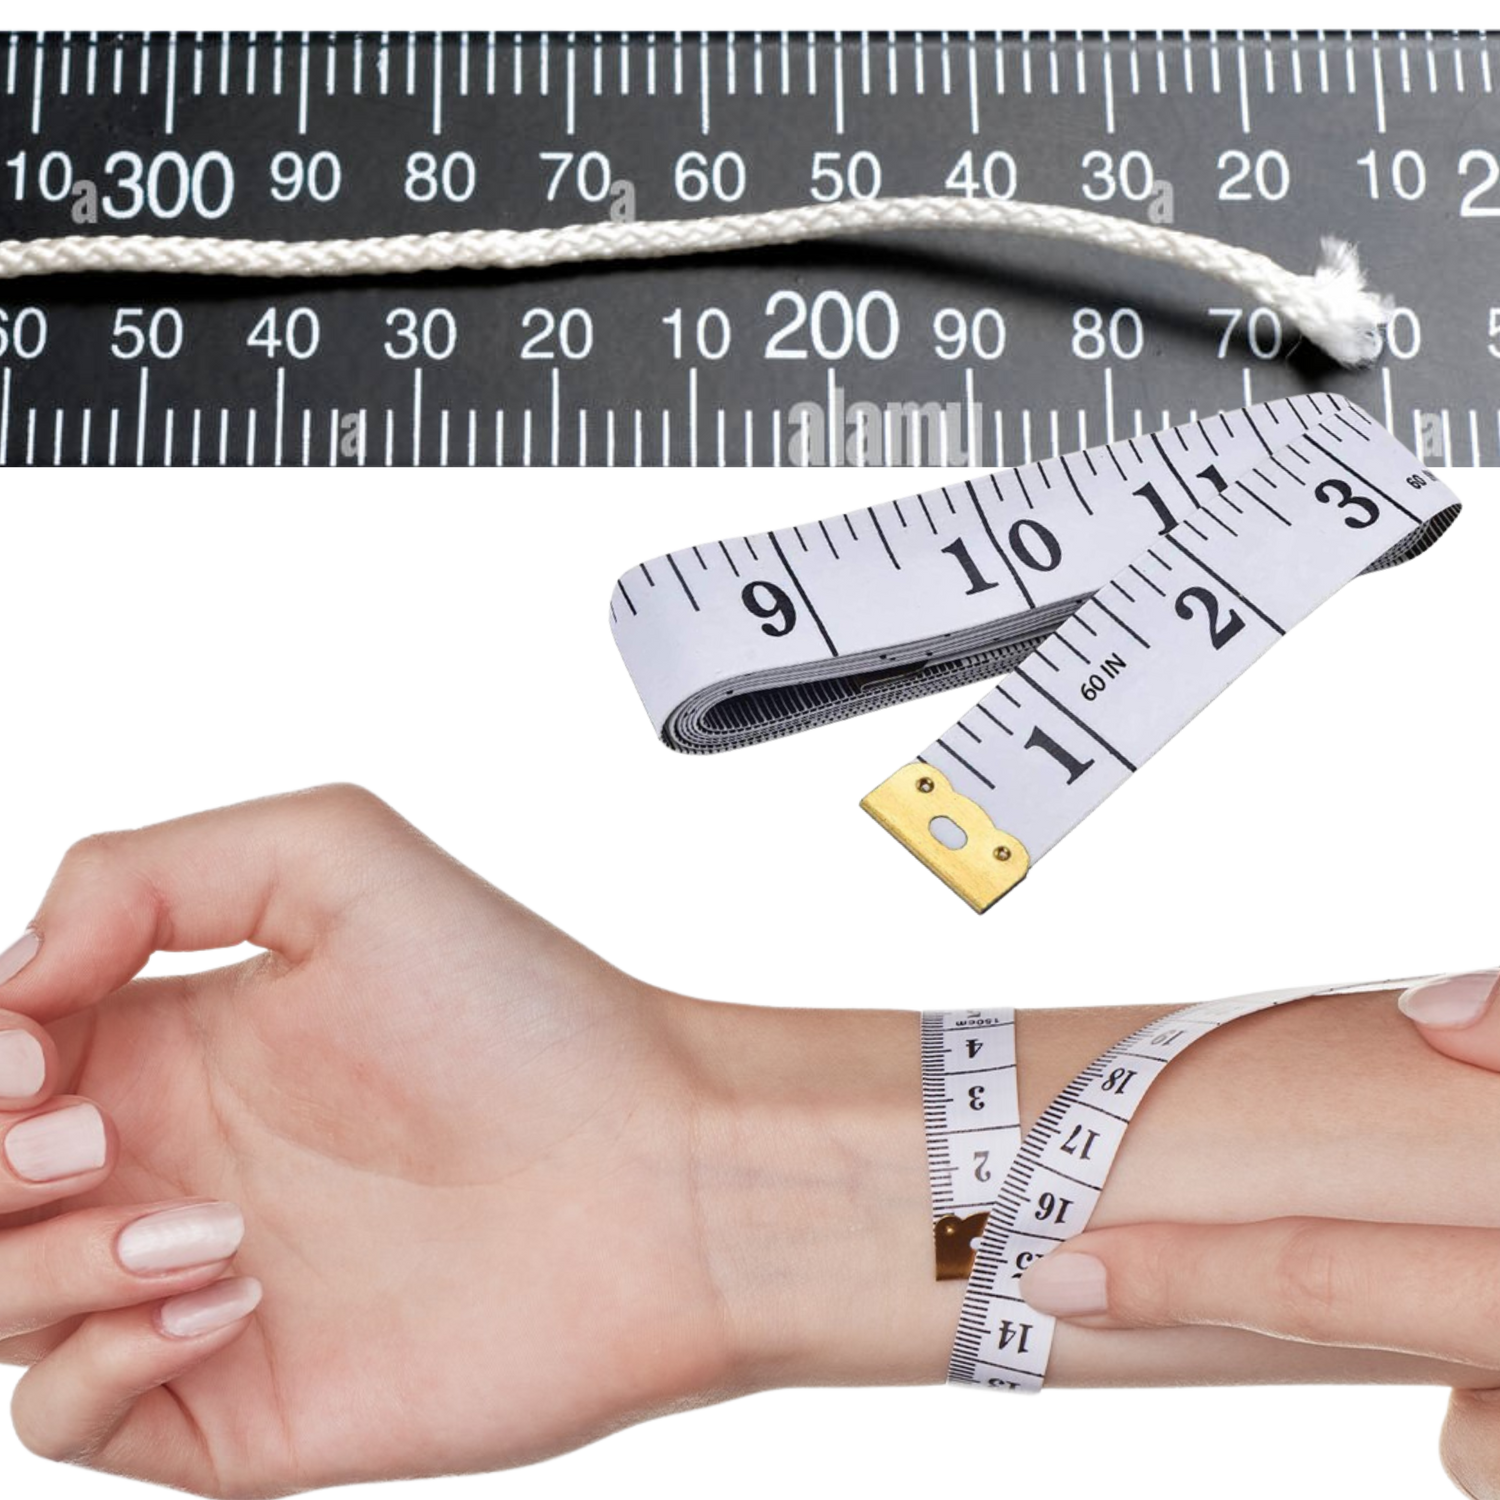 Measing tape and persons wrist displaying how to measure a wrist for bracelets